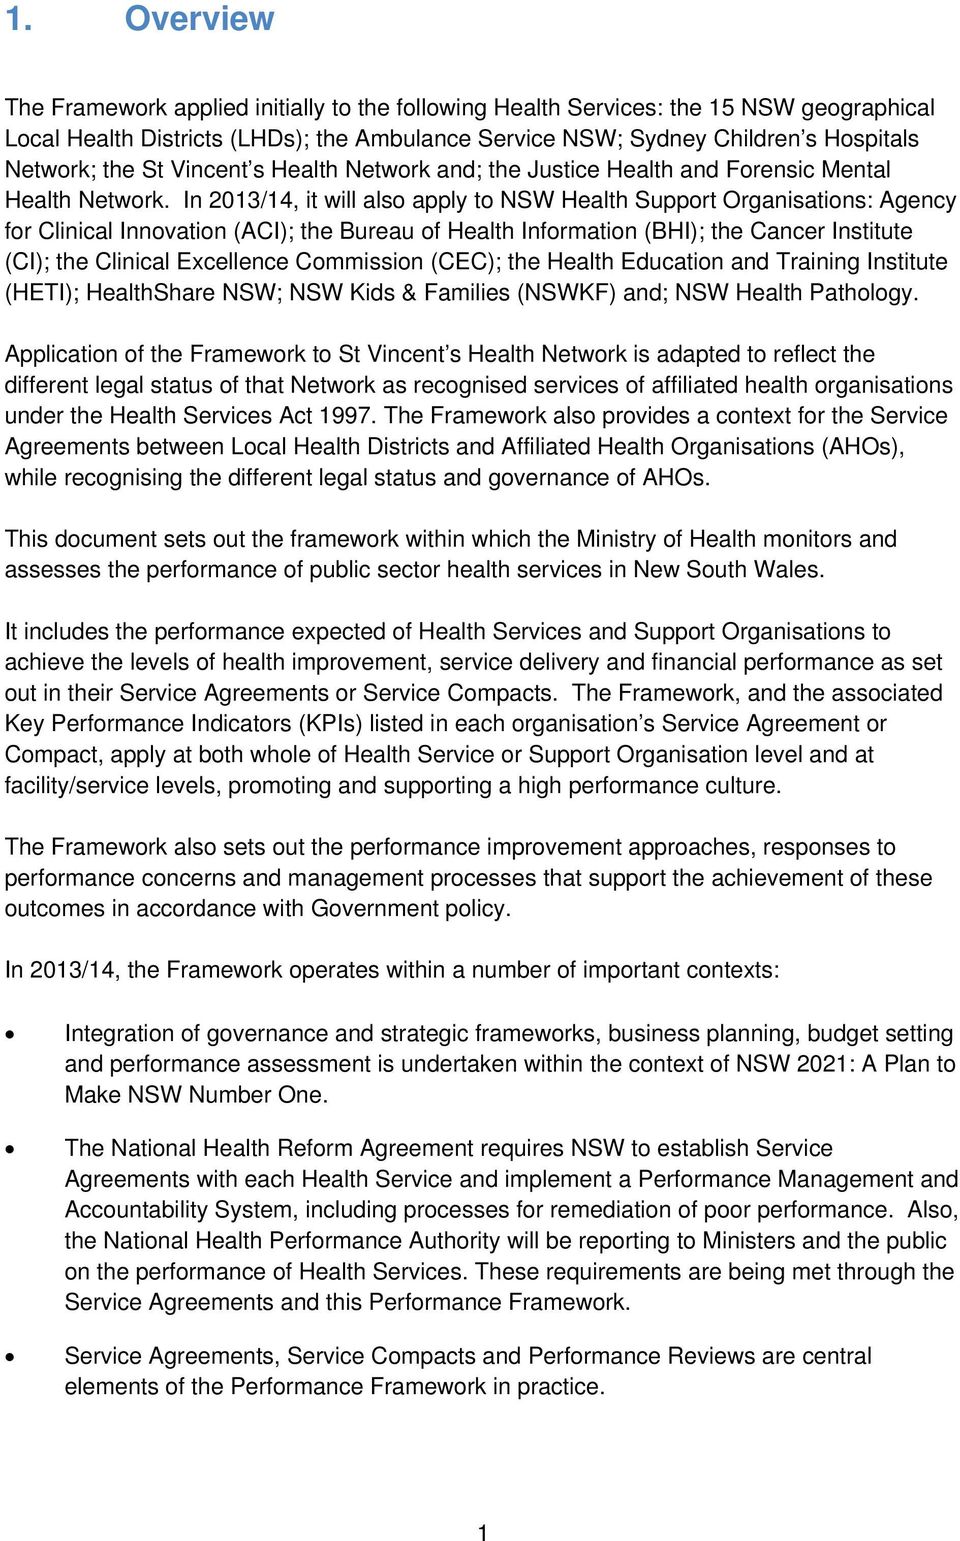 In 2013/14, it will also apply to NSW Health Support Organisations: Agency for Clinical Innovation (ACI); the Bureau of Health Information (BHI); the Cancer Institute (CI); the Clinical Excellence